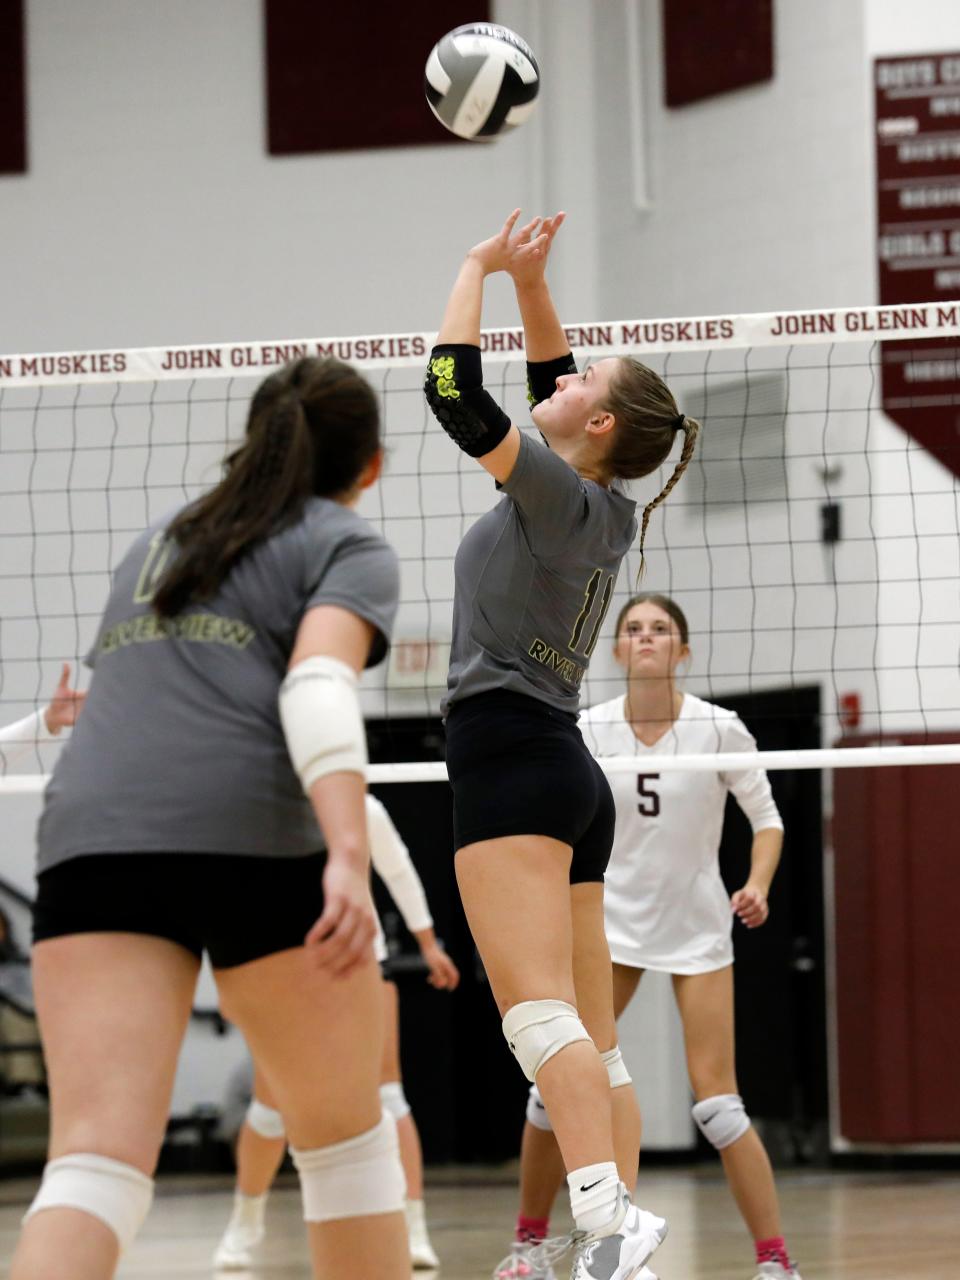 Kayla Dulgar sets the ball during River View's 25-22, 14-25, 25-17, 18-25, 7-15 loss to host John Glenn on Monday night in New Concord. 